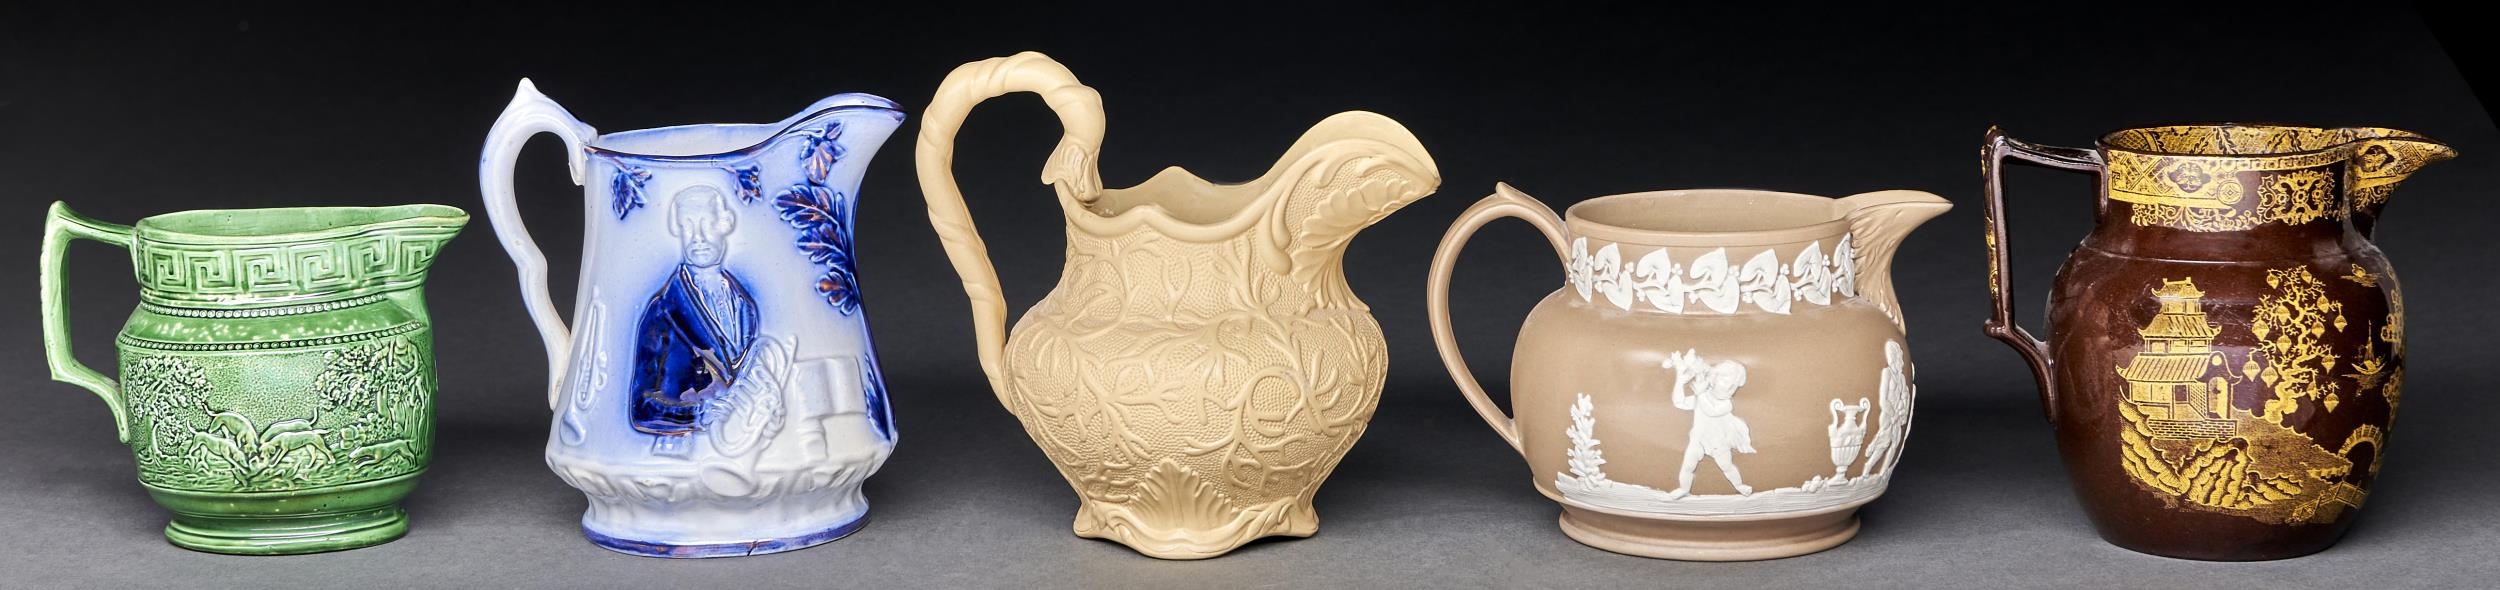 A Staffordshire brown glazed pearlware jug, c1830, transfer printed in yellow with a version of